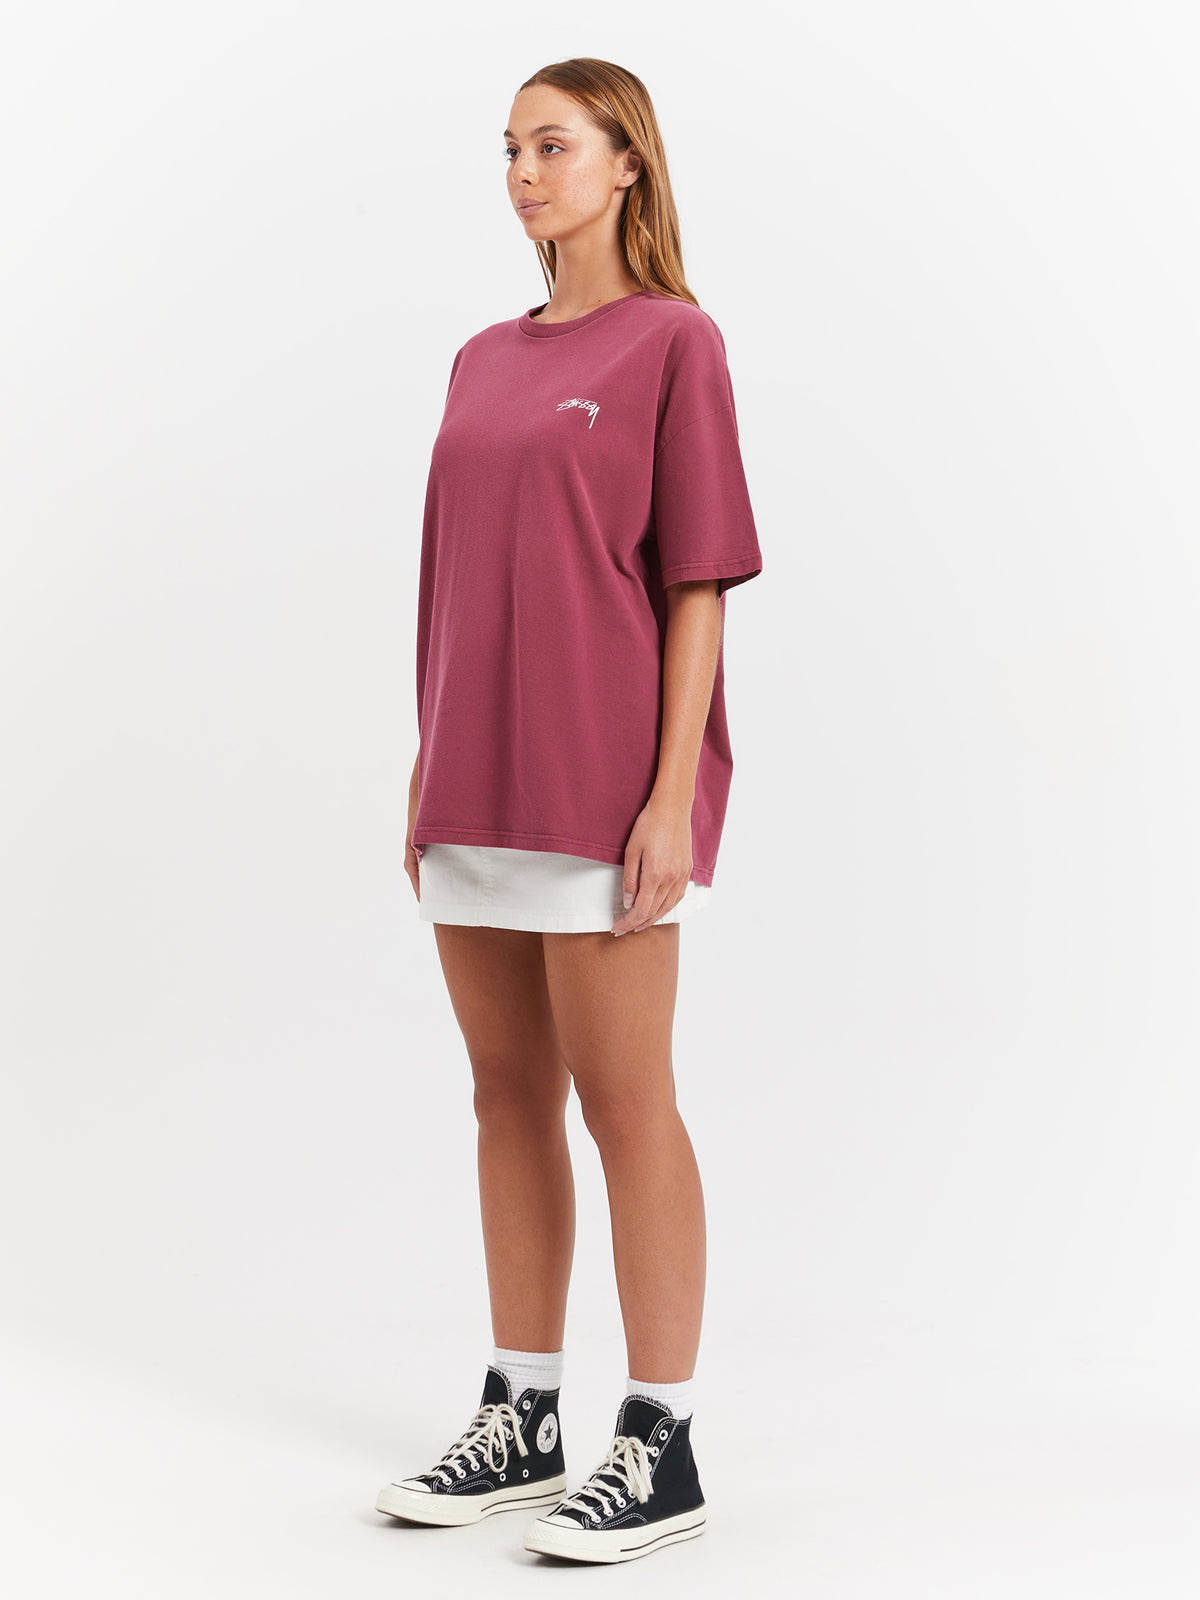 Statue Heavyweight Relaxed T-Shirt in Raspberry